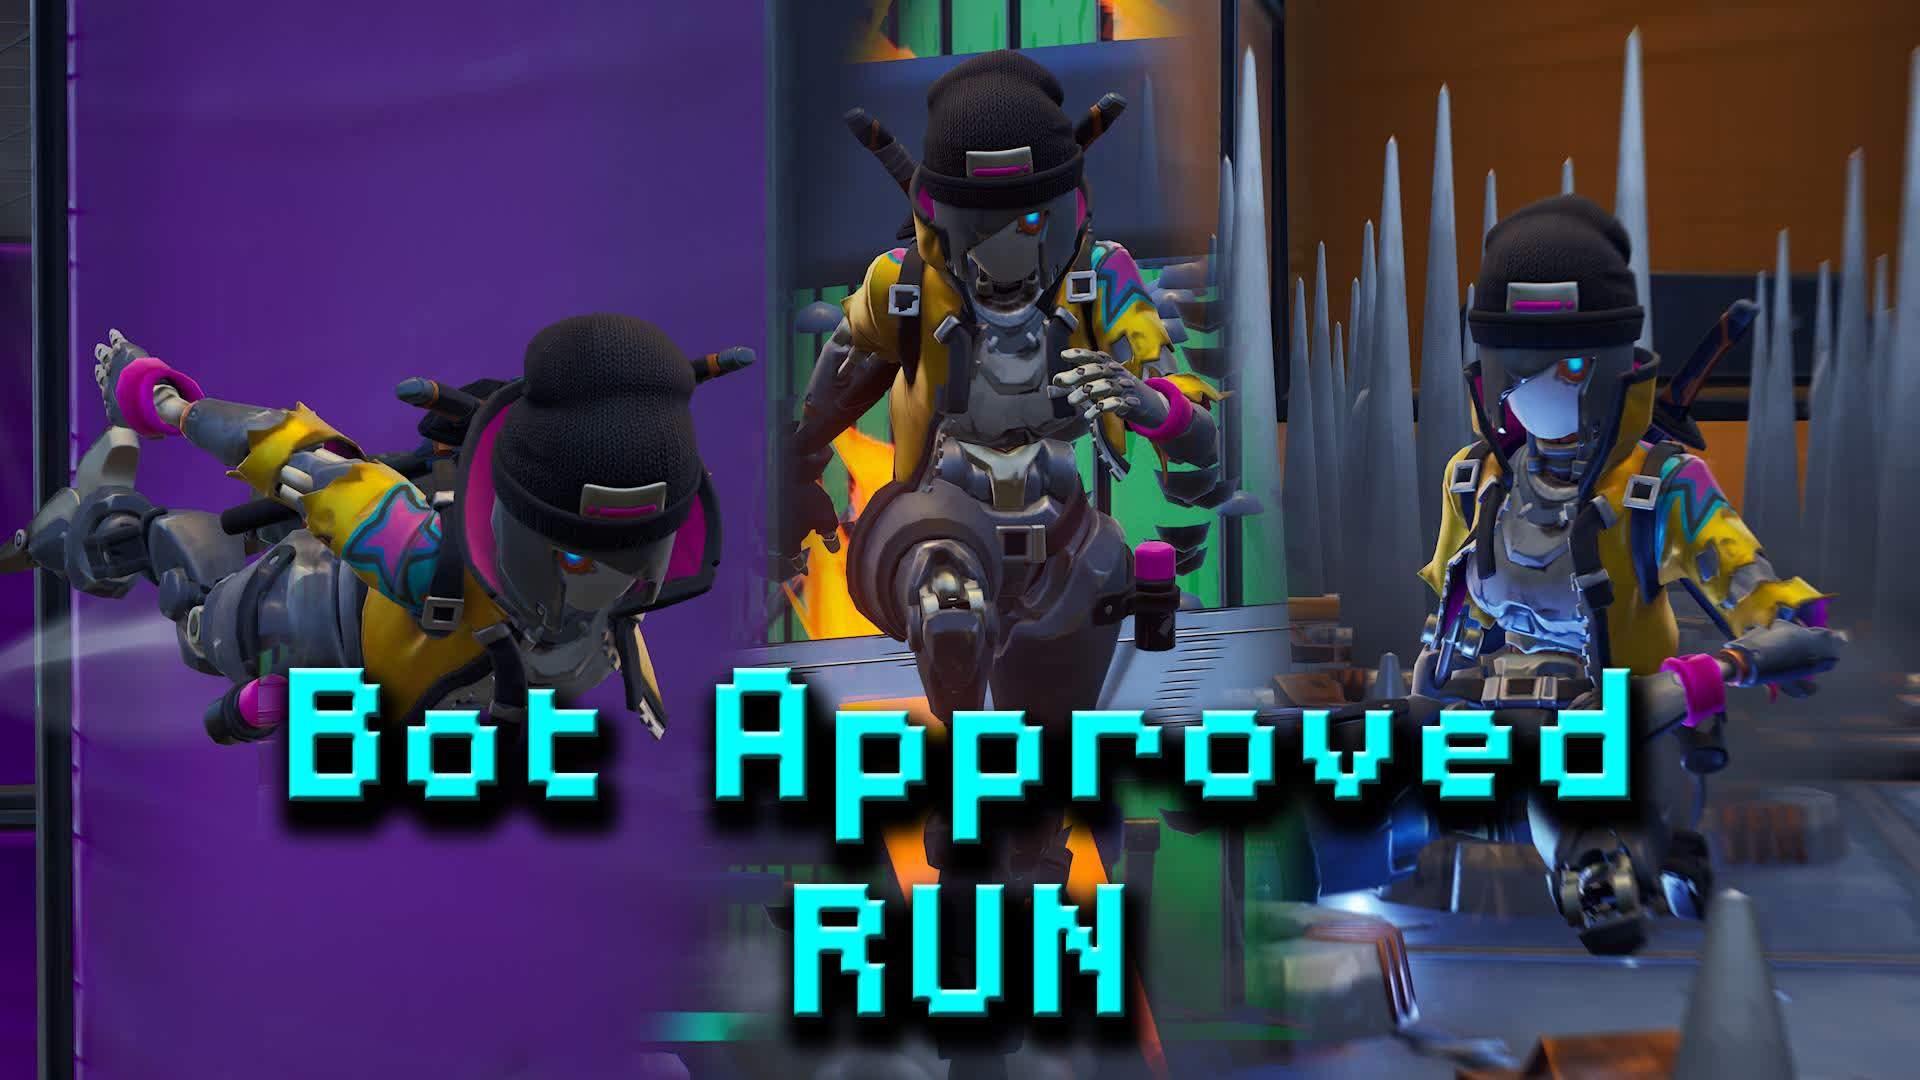 🤖 BOT APPROVED RUN 🏃‍♀️